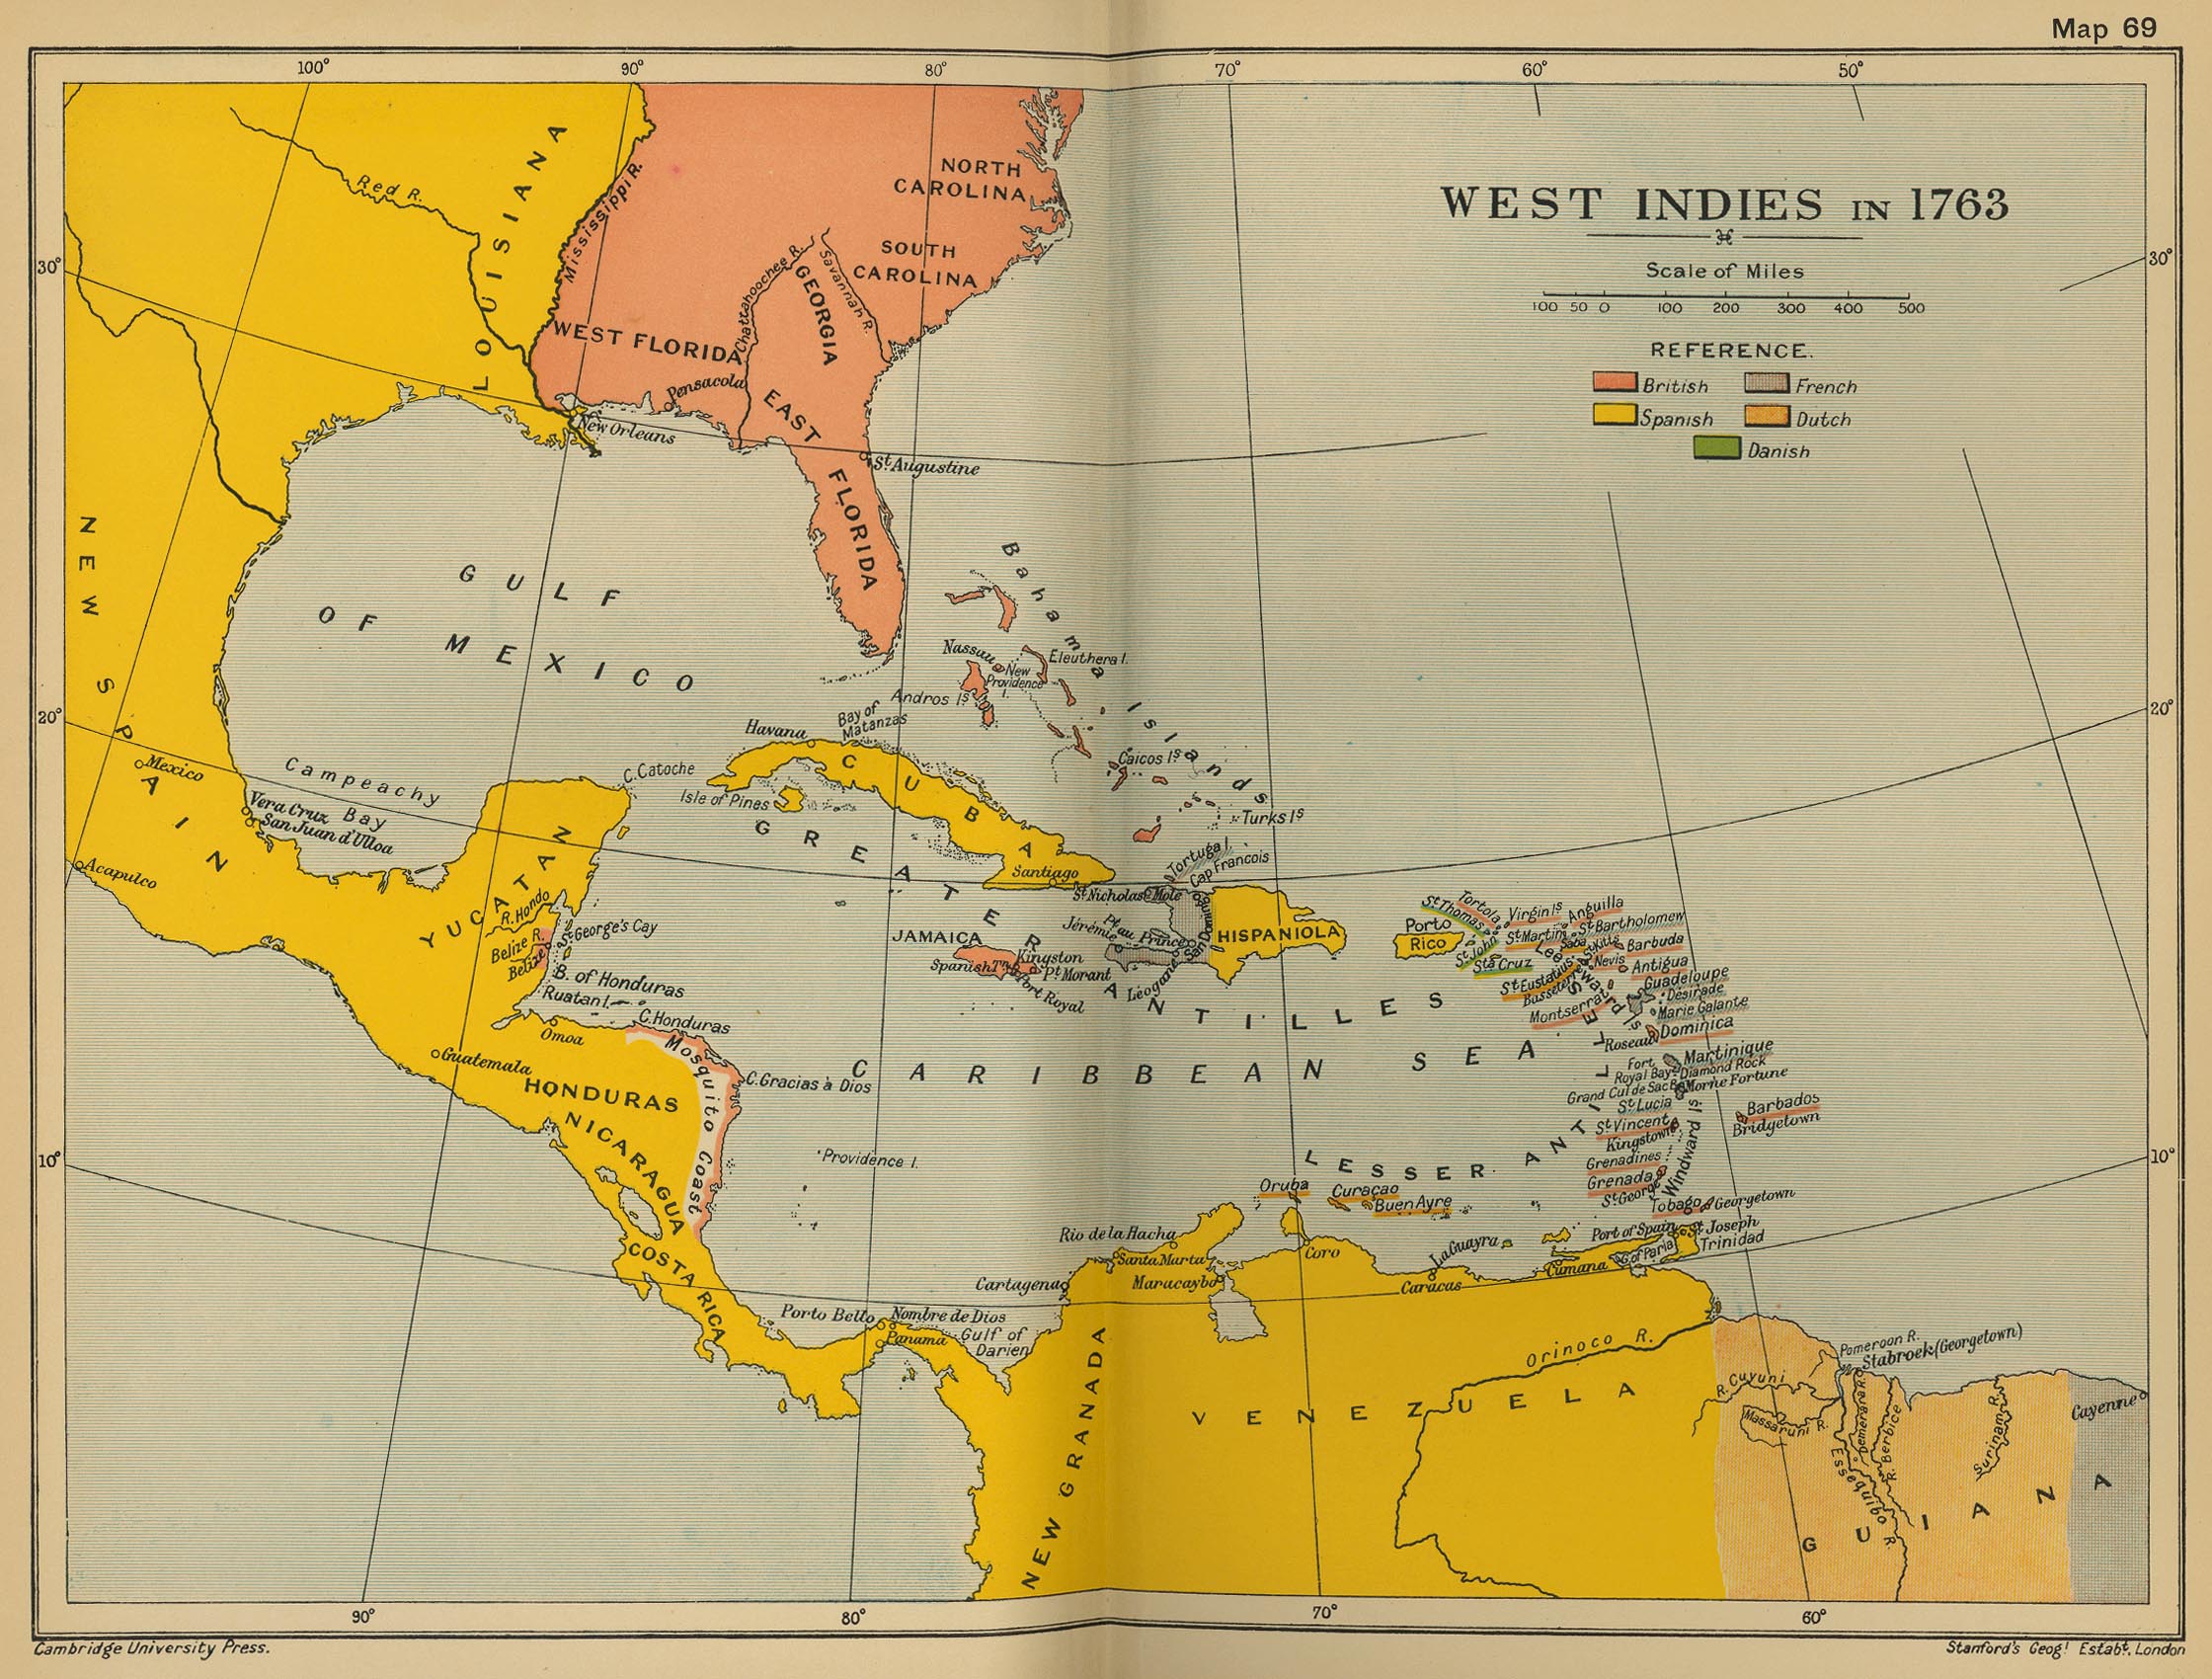 Map of the West Indies in 1763